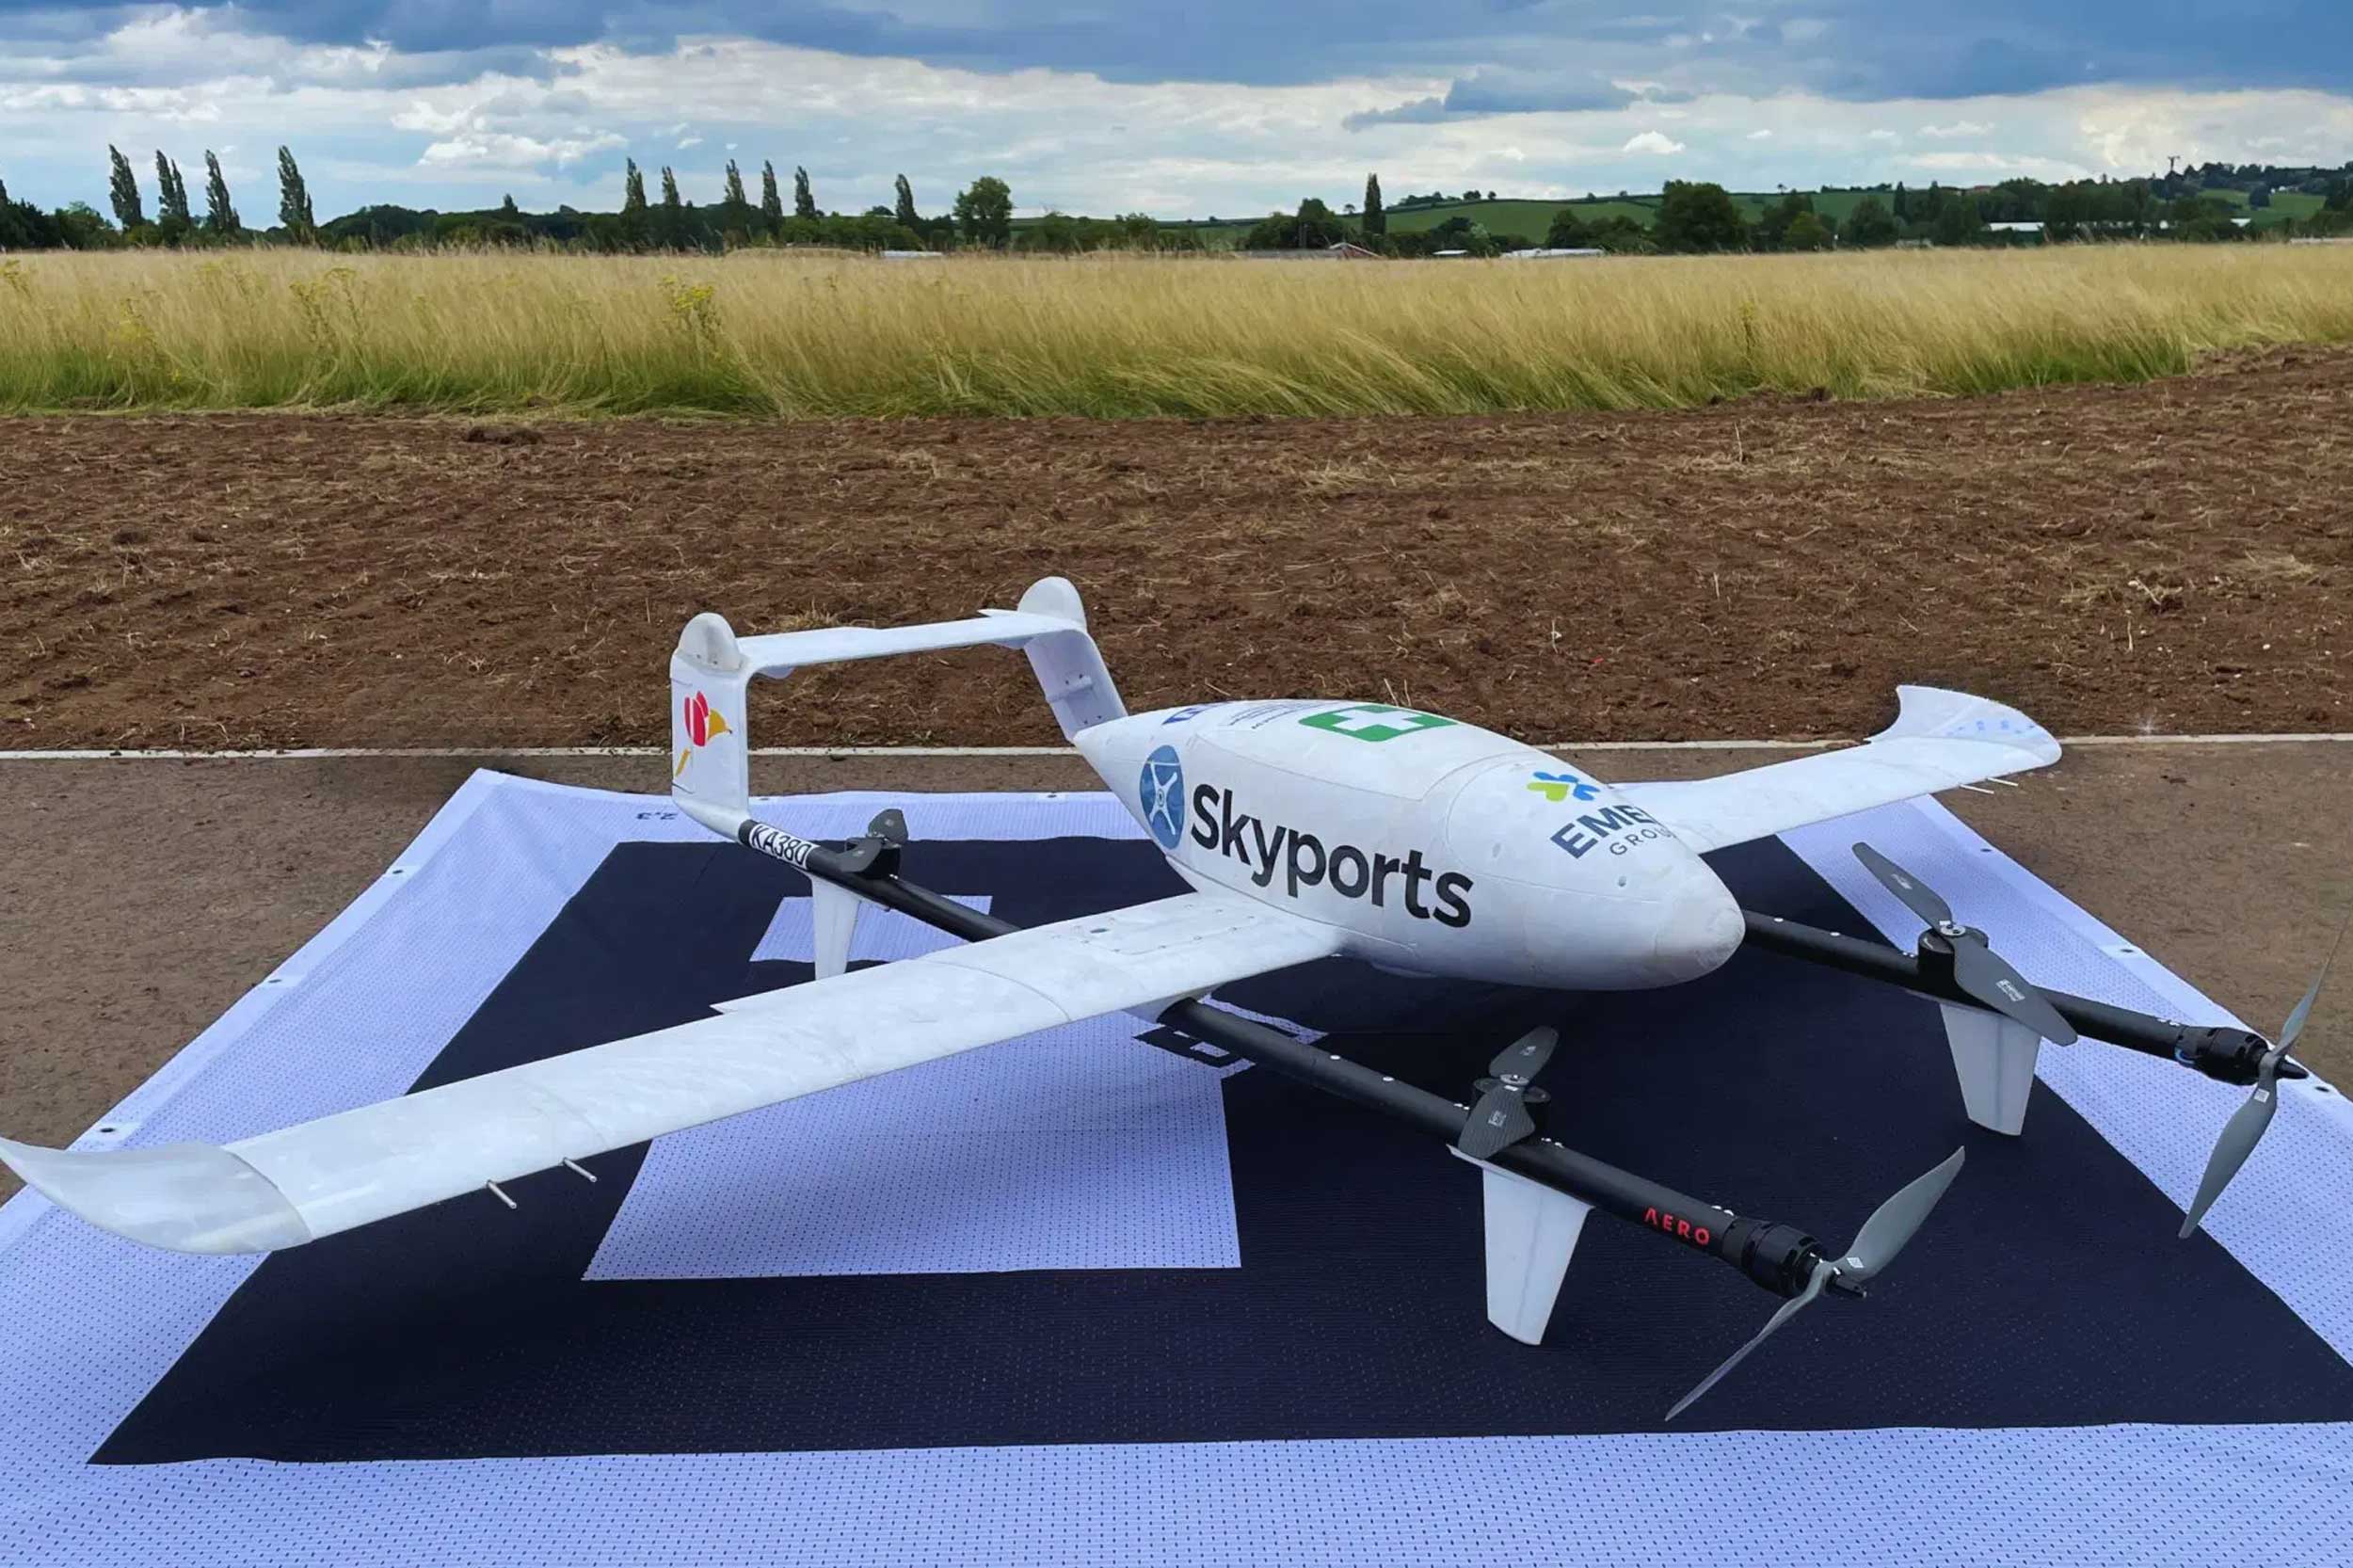 Skyports is just one of the drone companies taking part in the sandbox trials